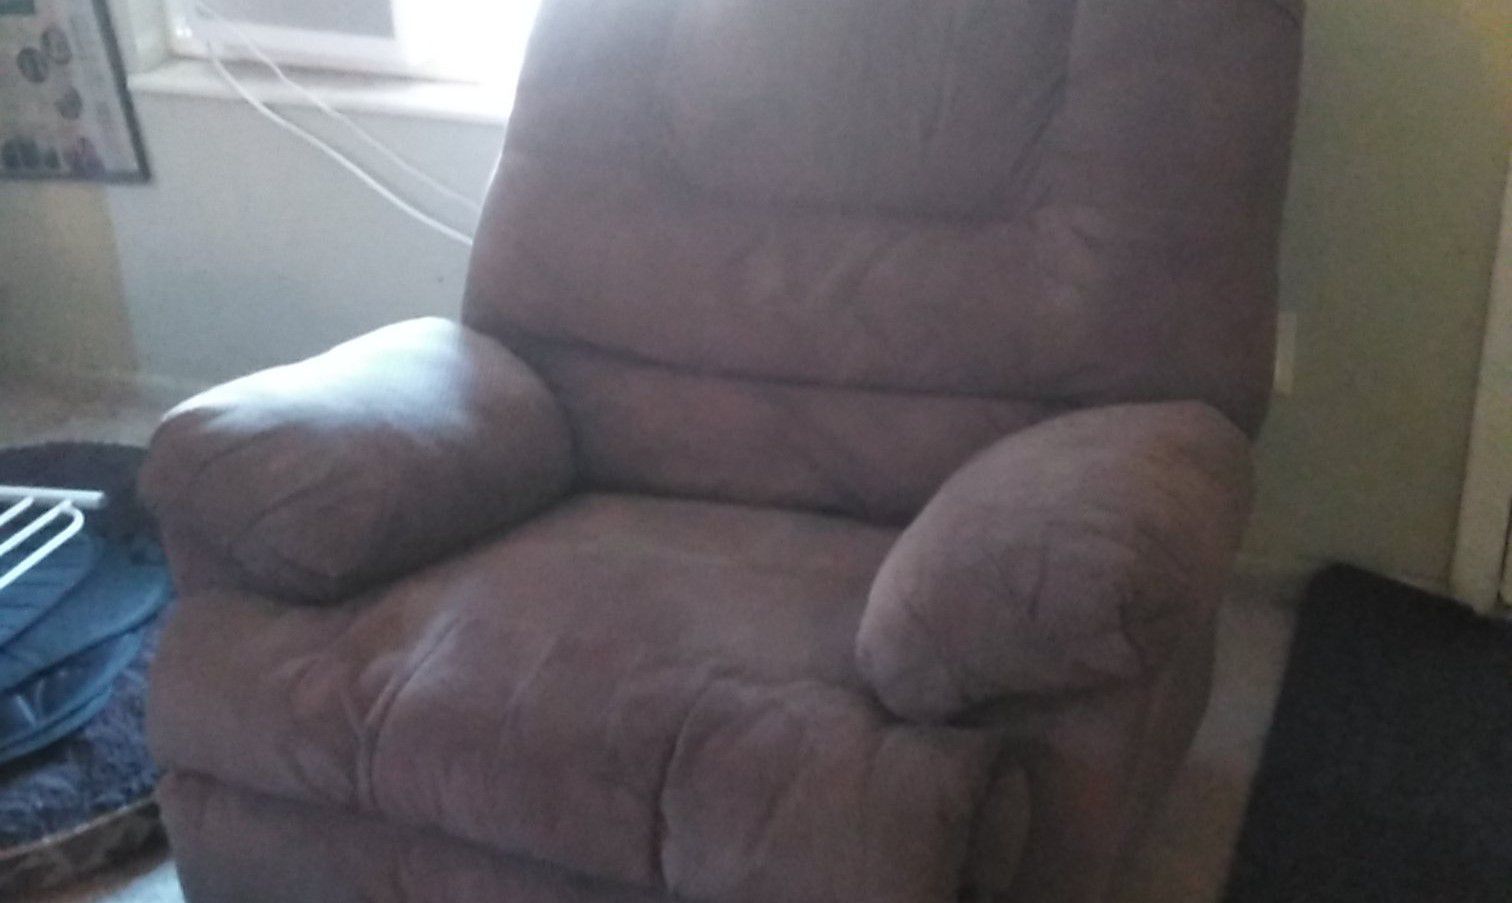 Free Couch and Recliner